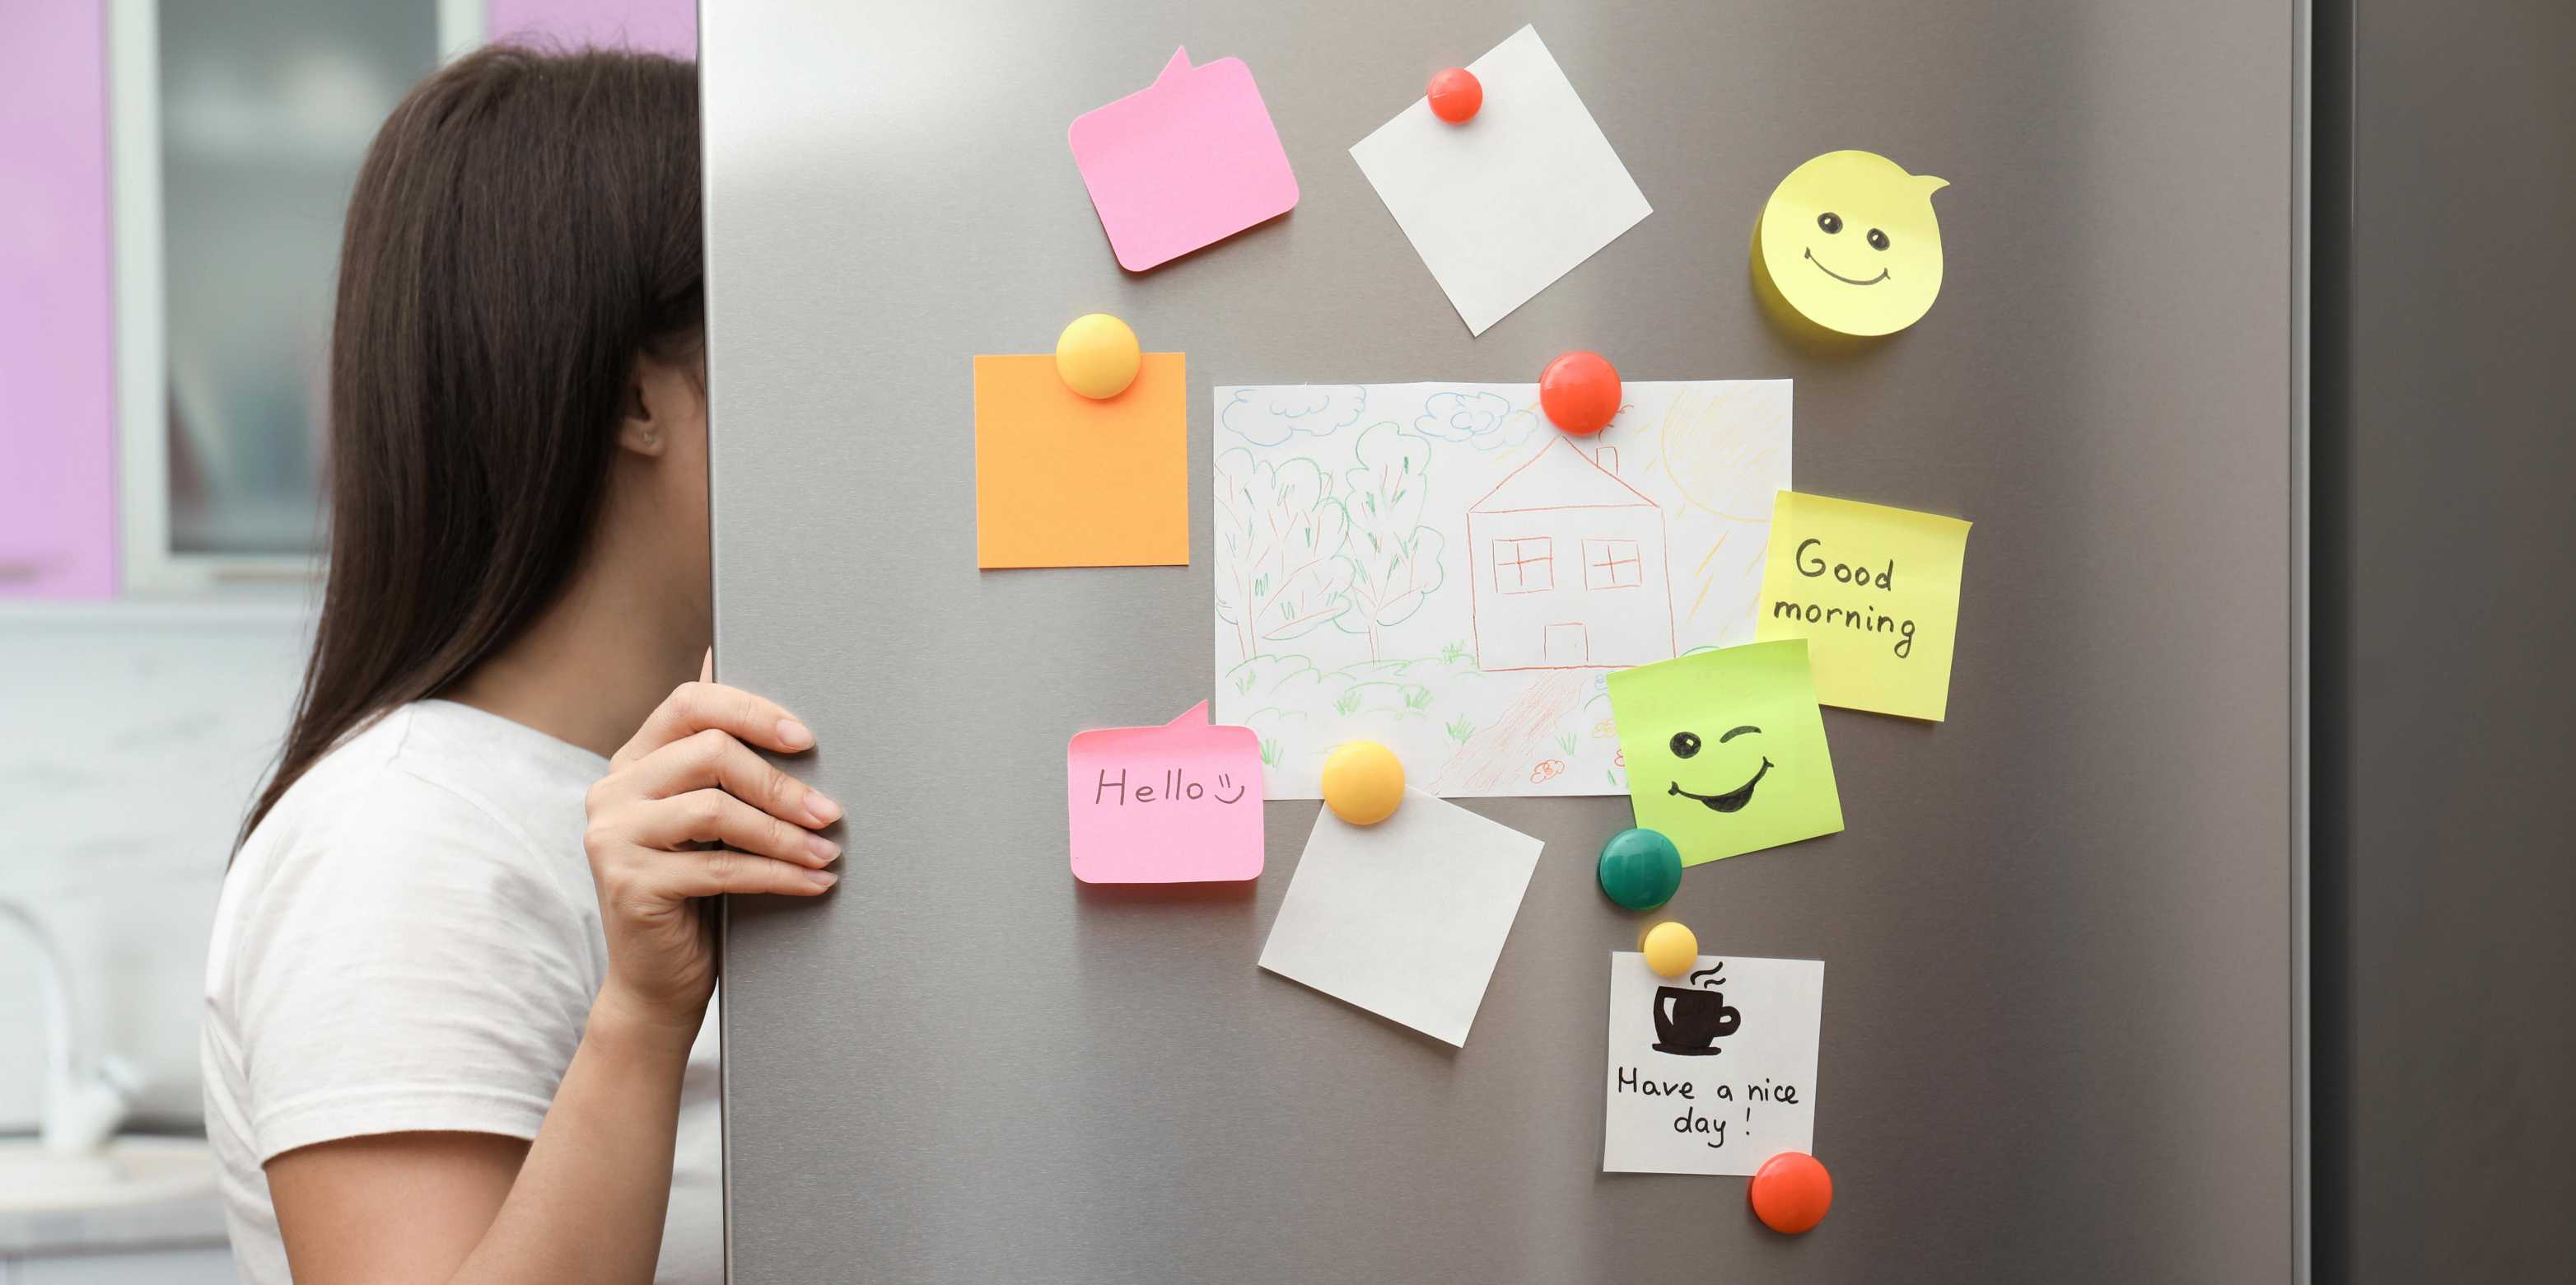 A woman opens the fridge and looks inside. The fridge door is covered in magnets and post-its.